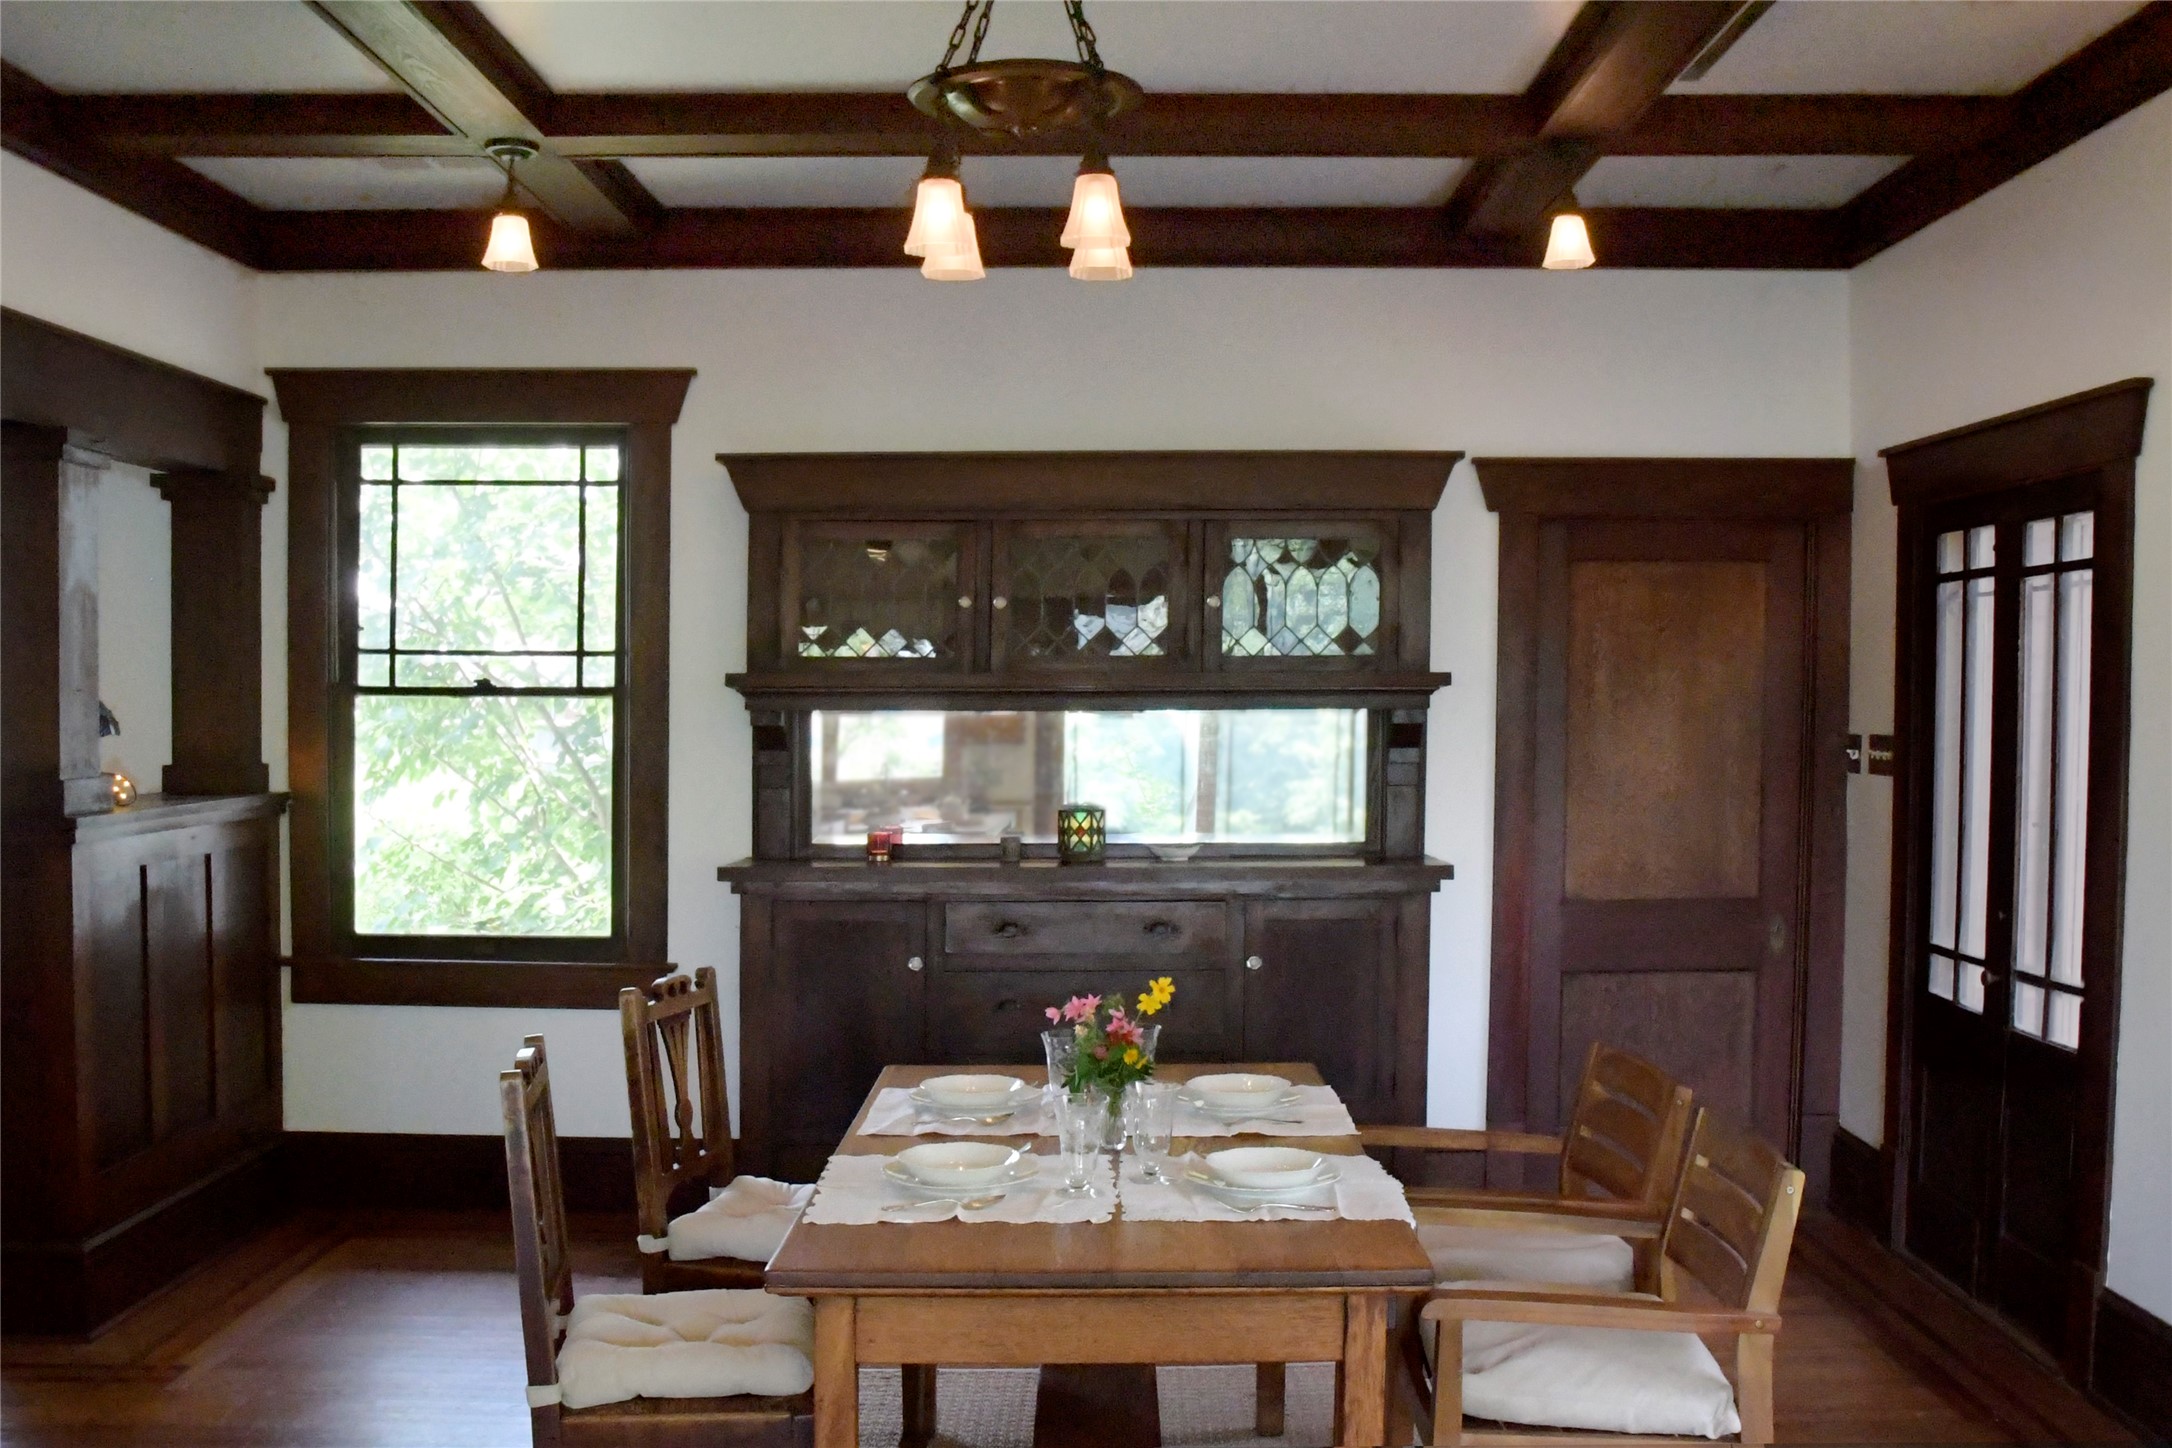 Dining room: Just as it was in 1913, featuring built-in china closet, coffered ceilings, and chandelier.